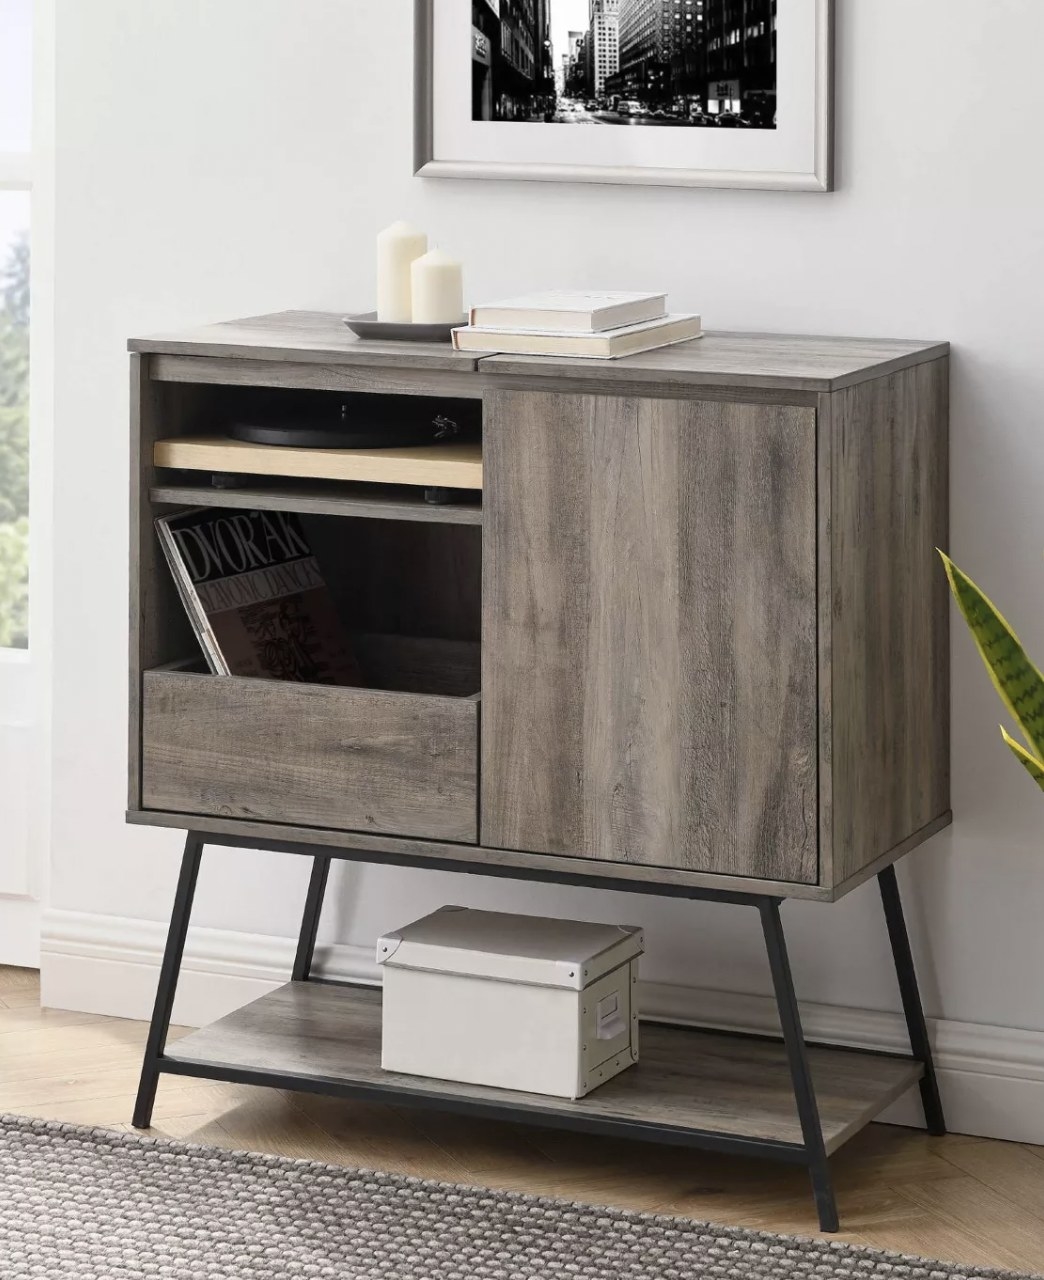 a black and grey media cabinet holding records and a record player